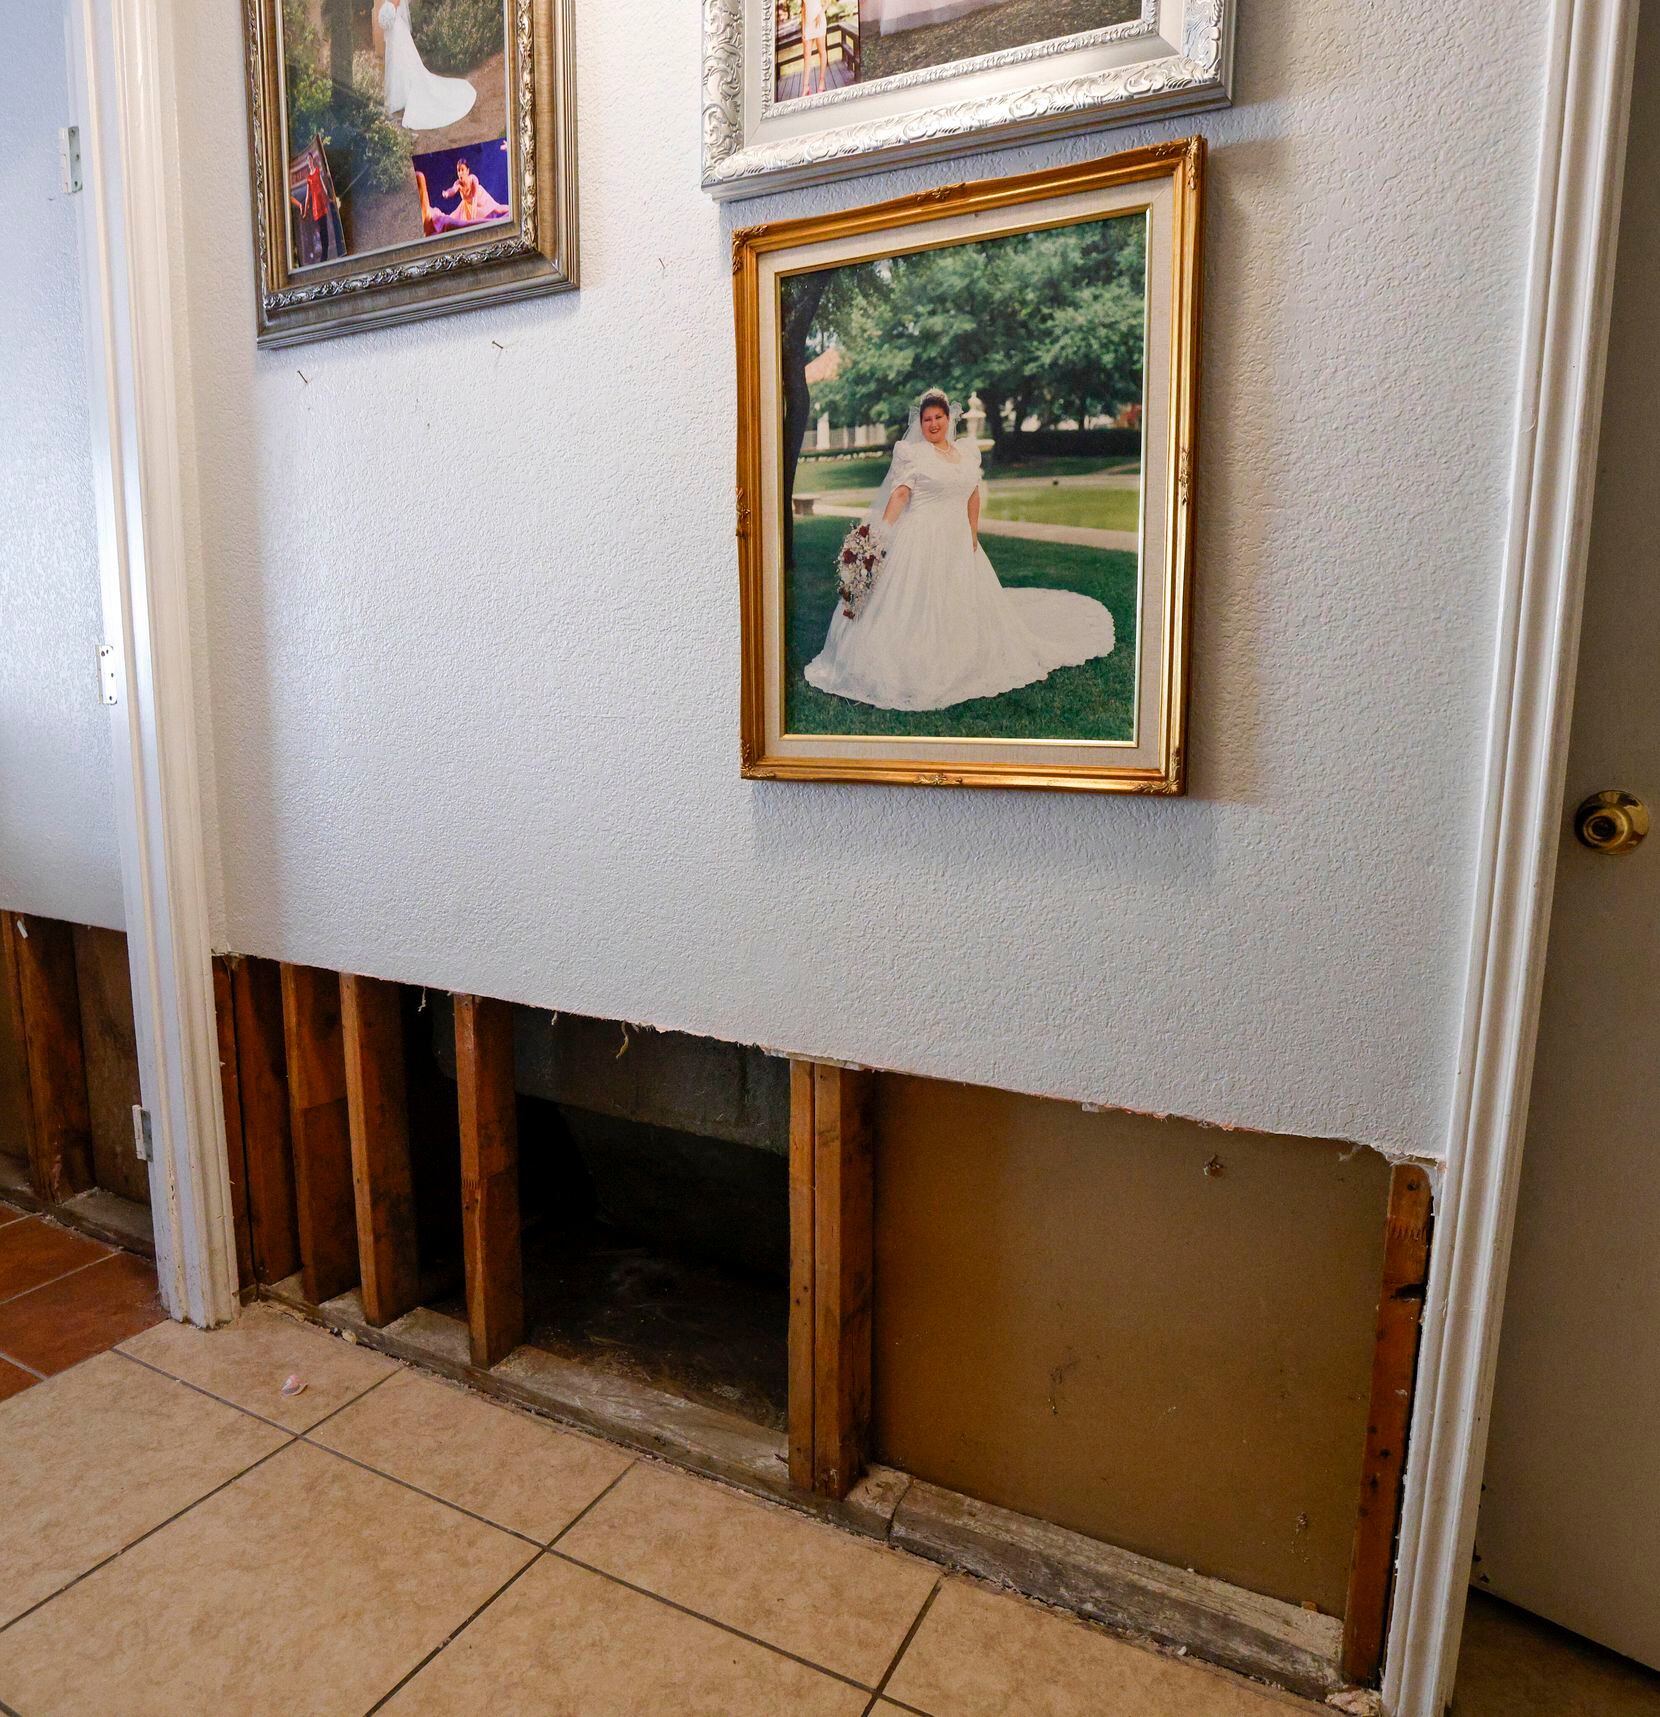 Family wedding photos hang above drywall that has been removed throughout Delores Lopez's...